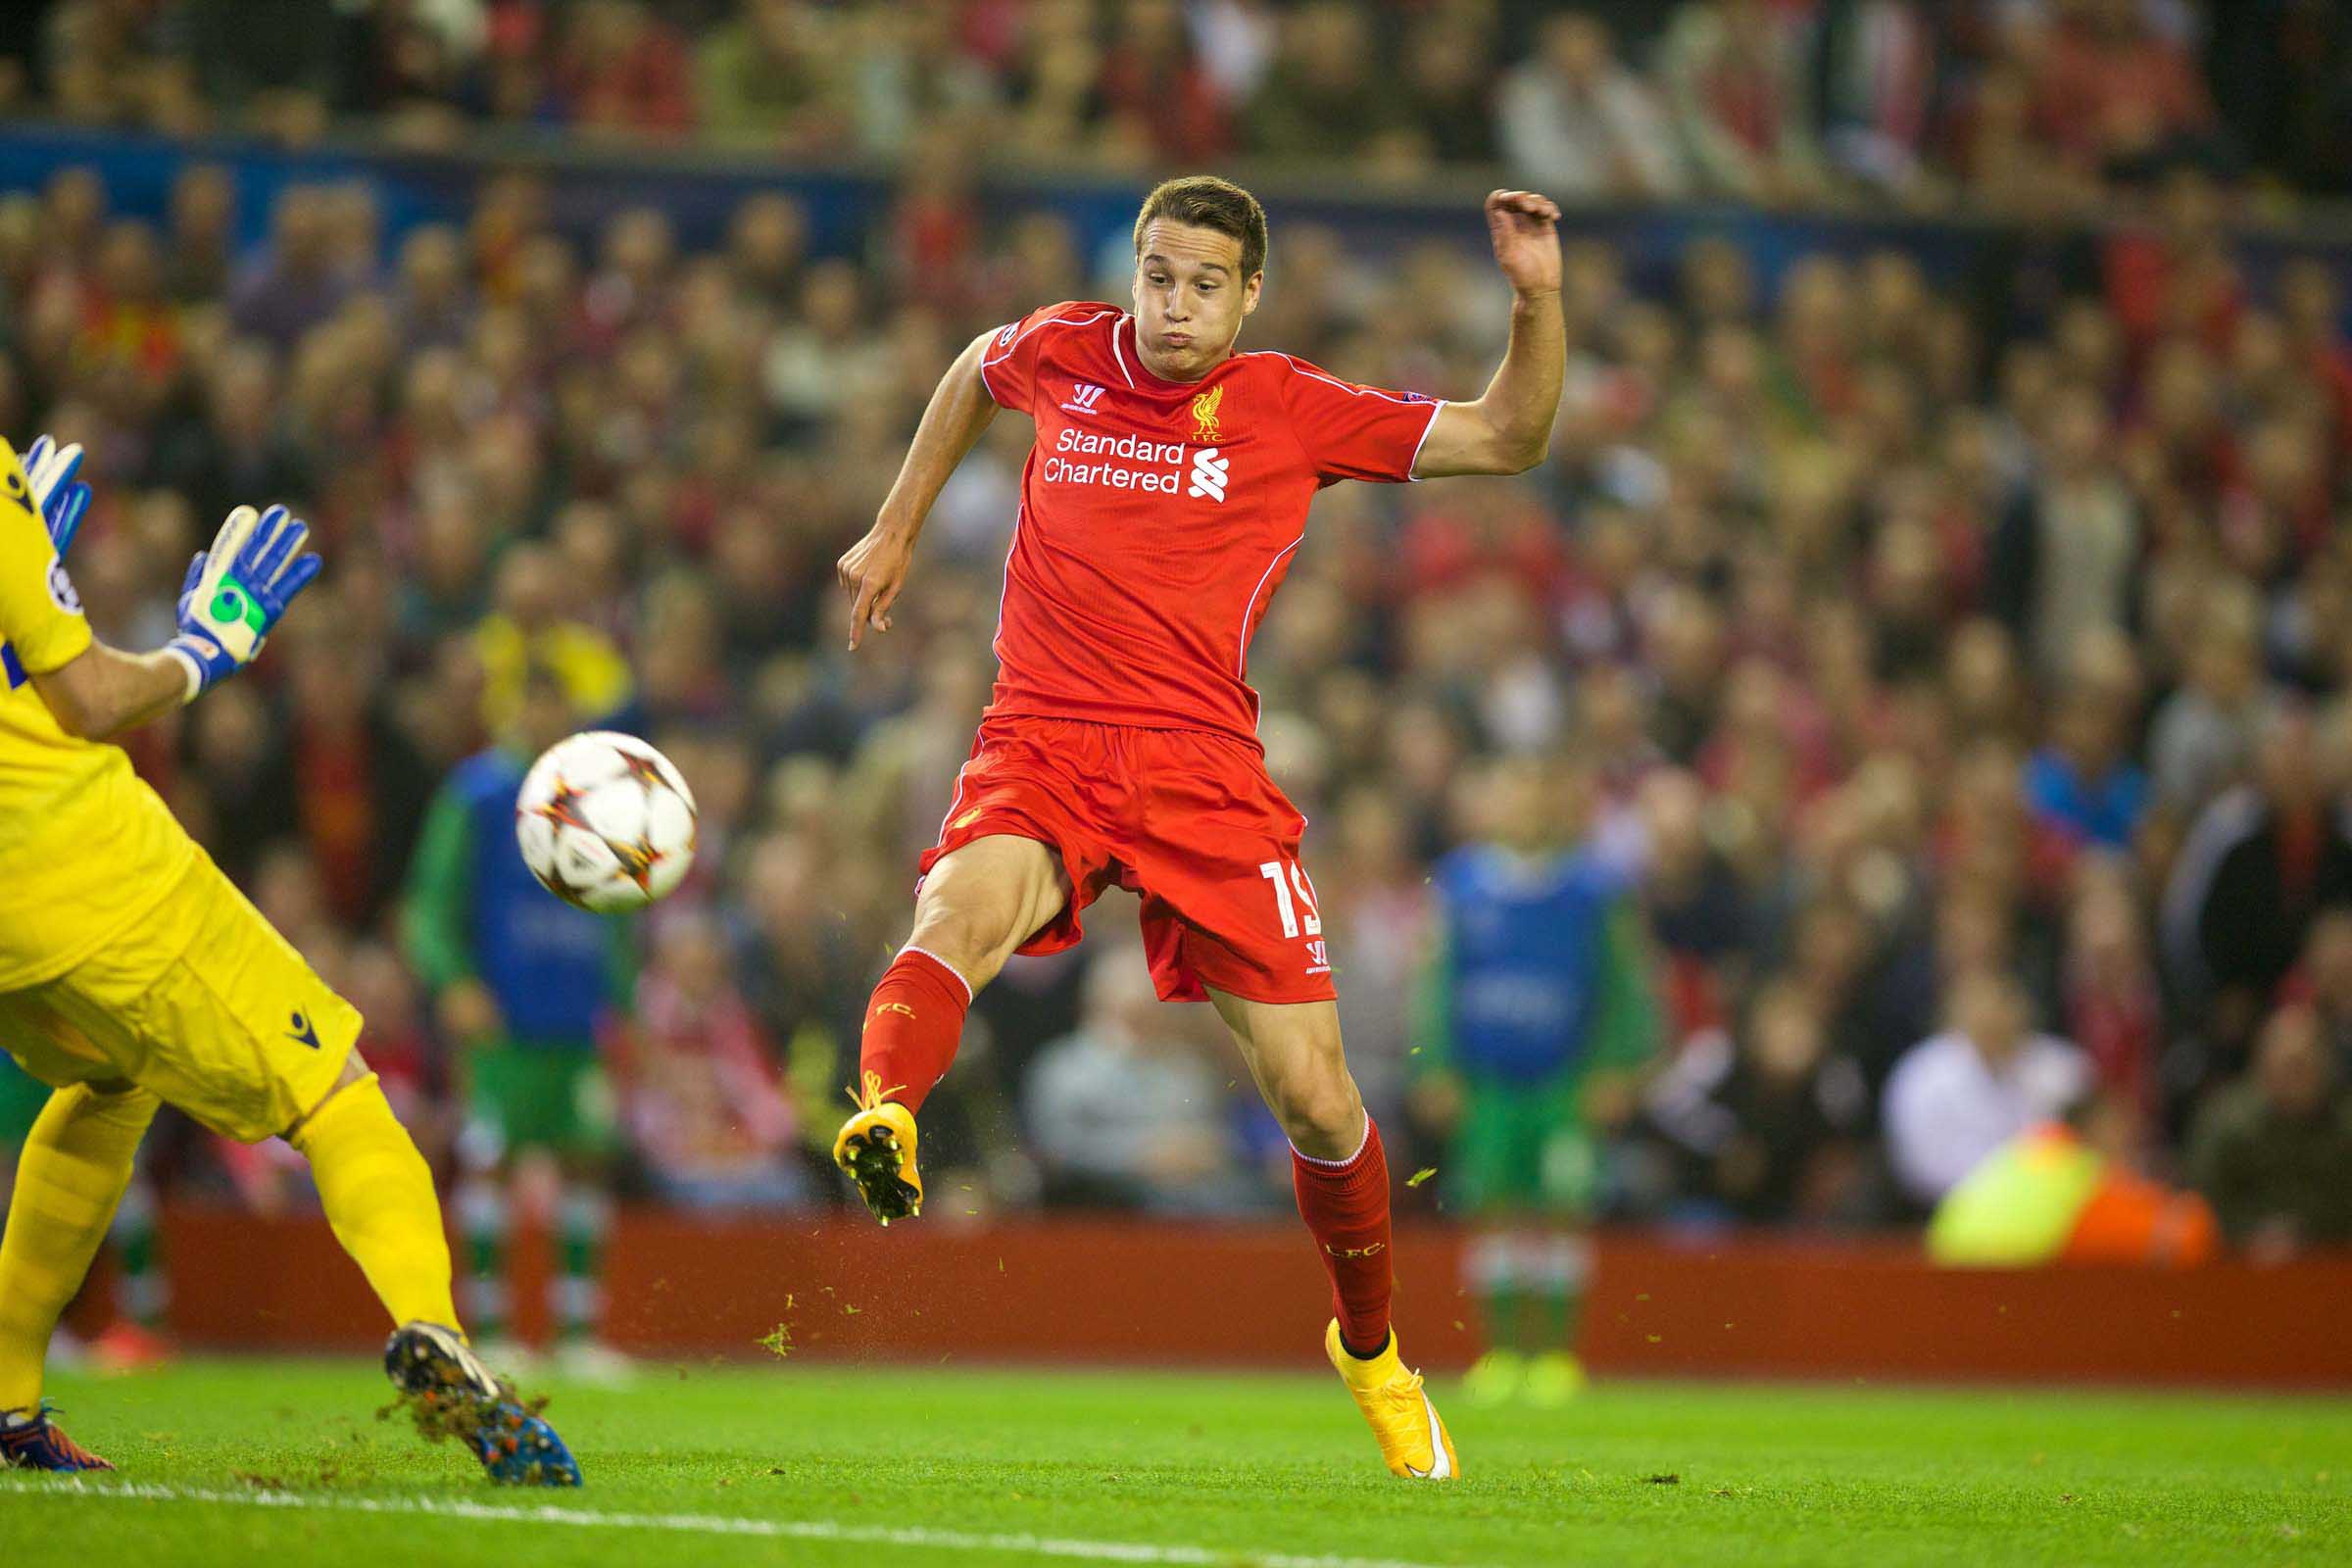 JAVIER MANQUILLO: A LESSON FROM HISTORY